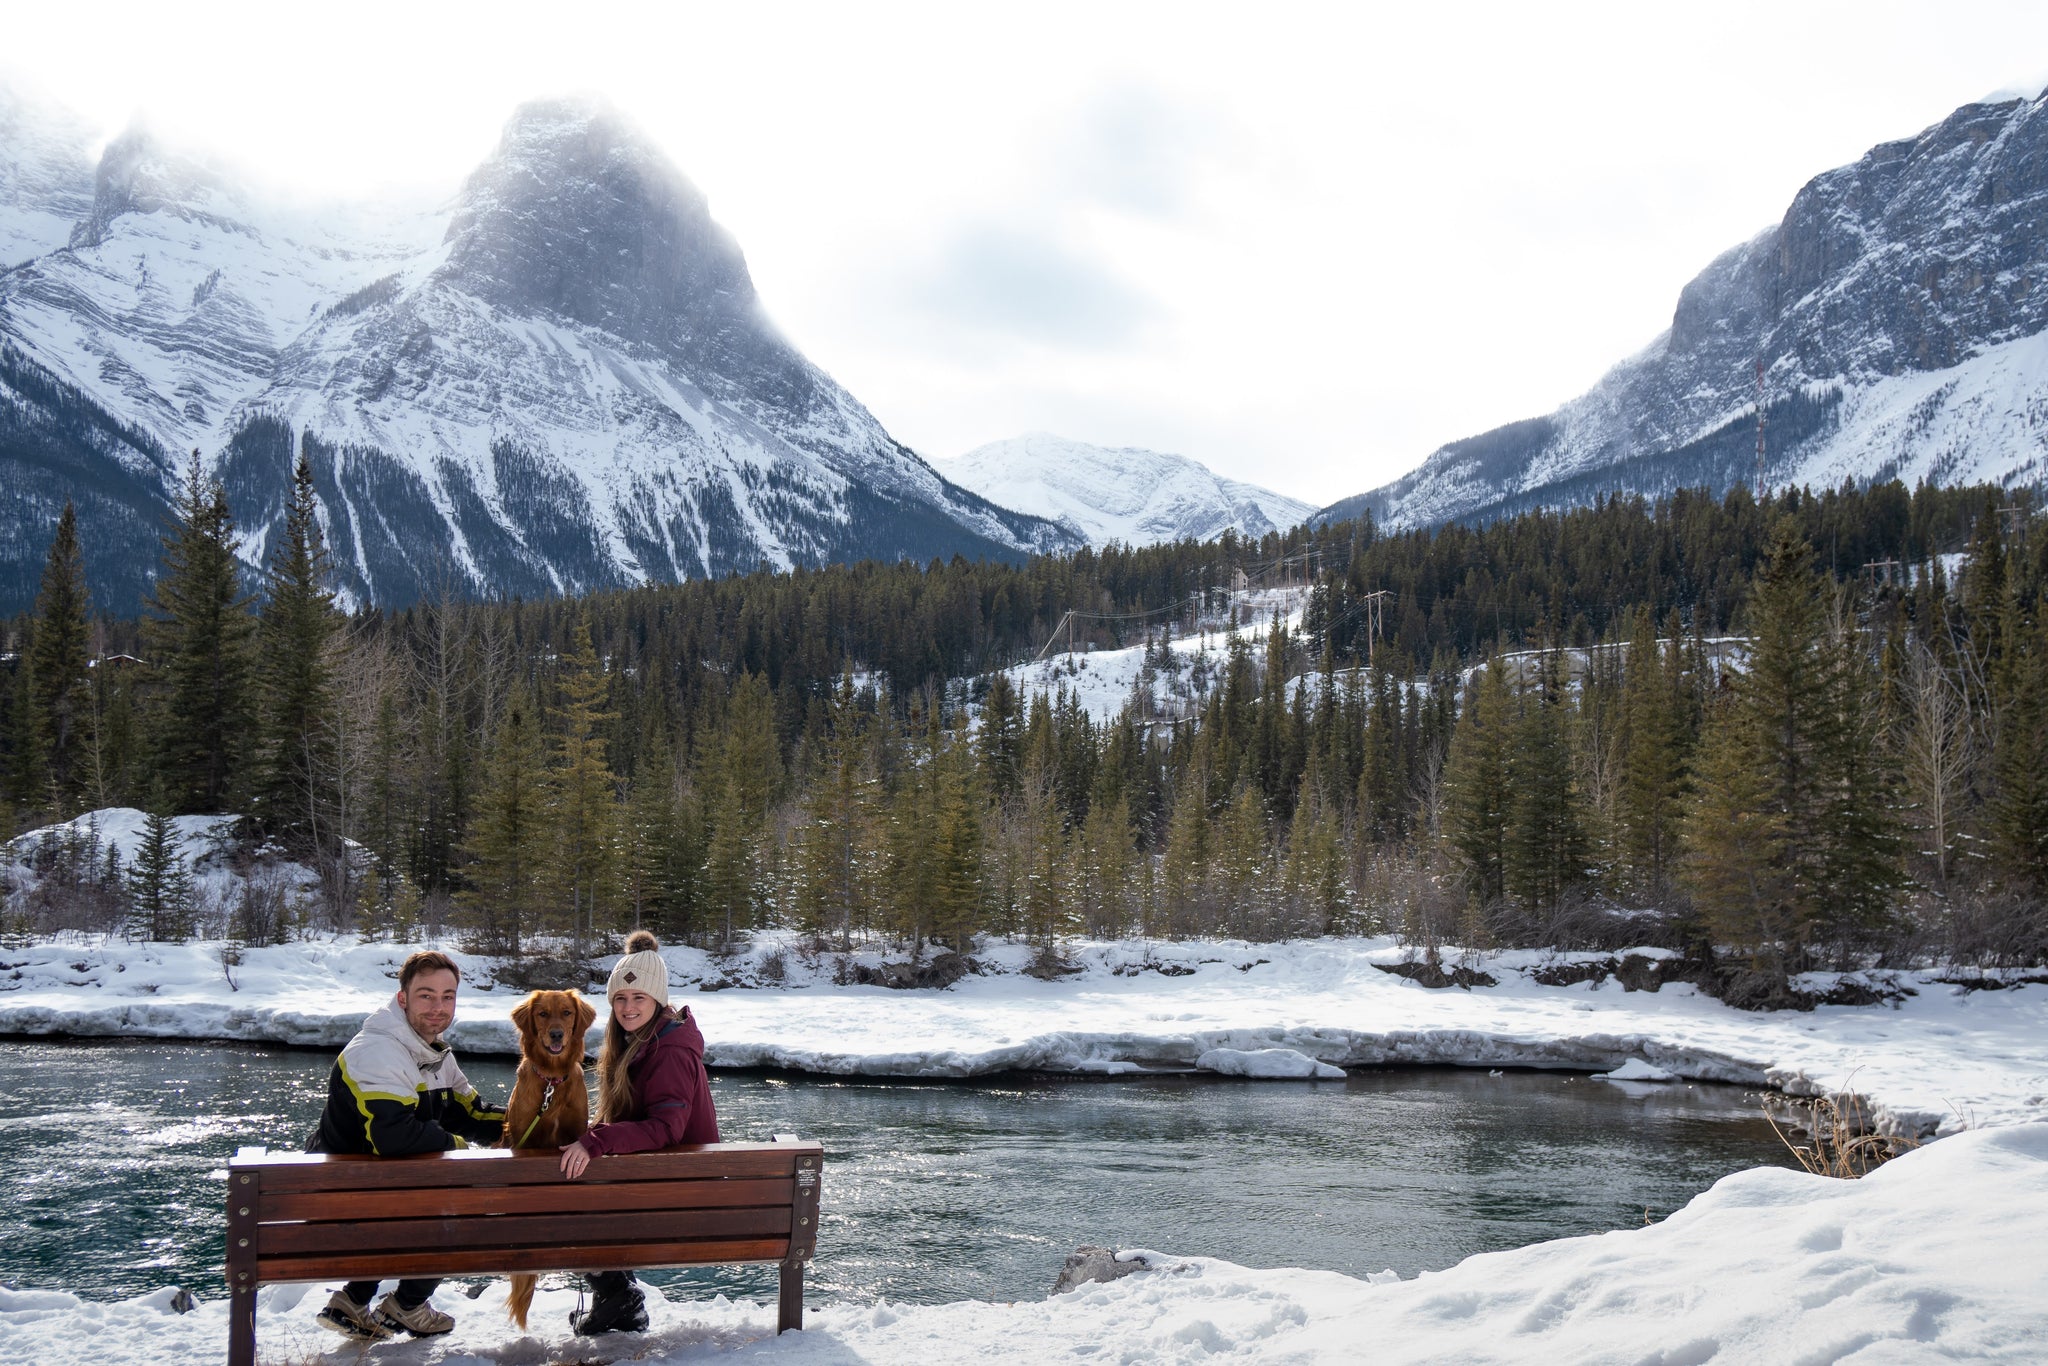 Canmore Canine's owners and their dog sat on park bench in front of beautiful snow capped mountain backdrop. Image used as part of a we care promotion provoking thoughts of happiness and well being. The image also introduces Medical Detection Dogs Charity